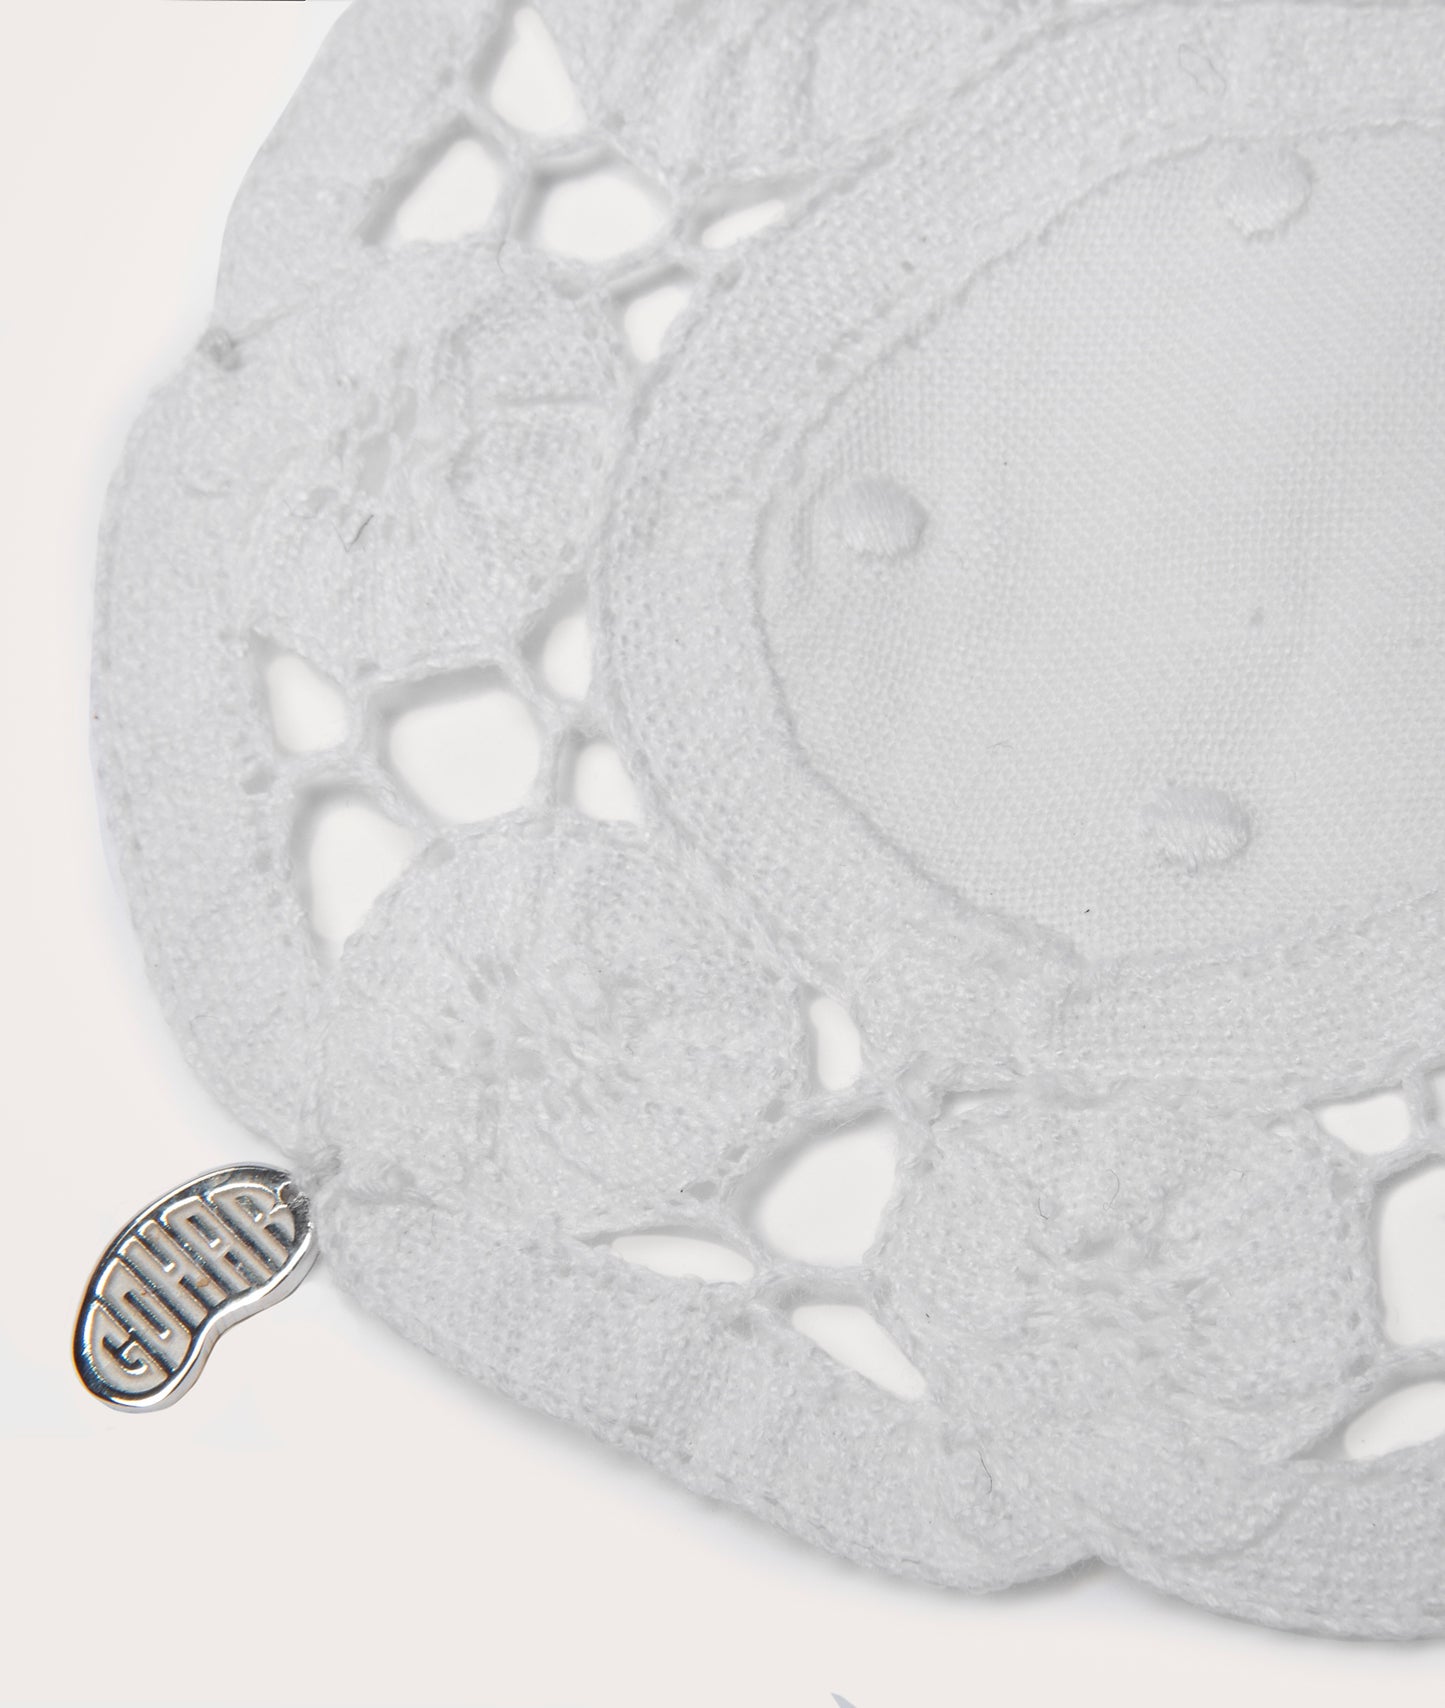 Coaster, Lace with Sterling Silver Bean